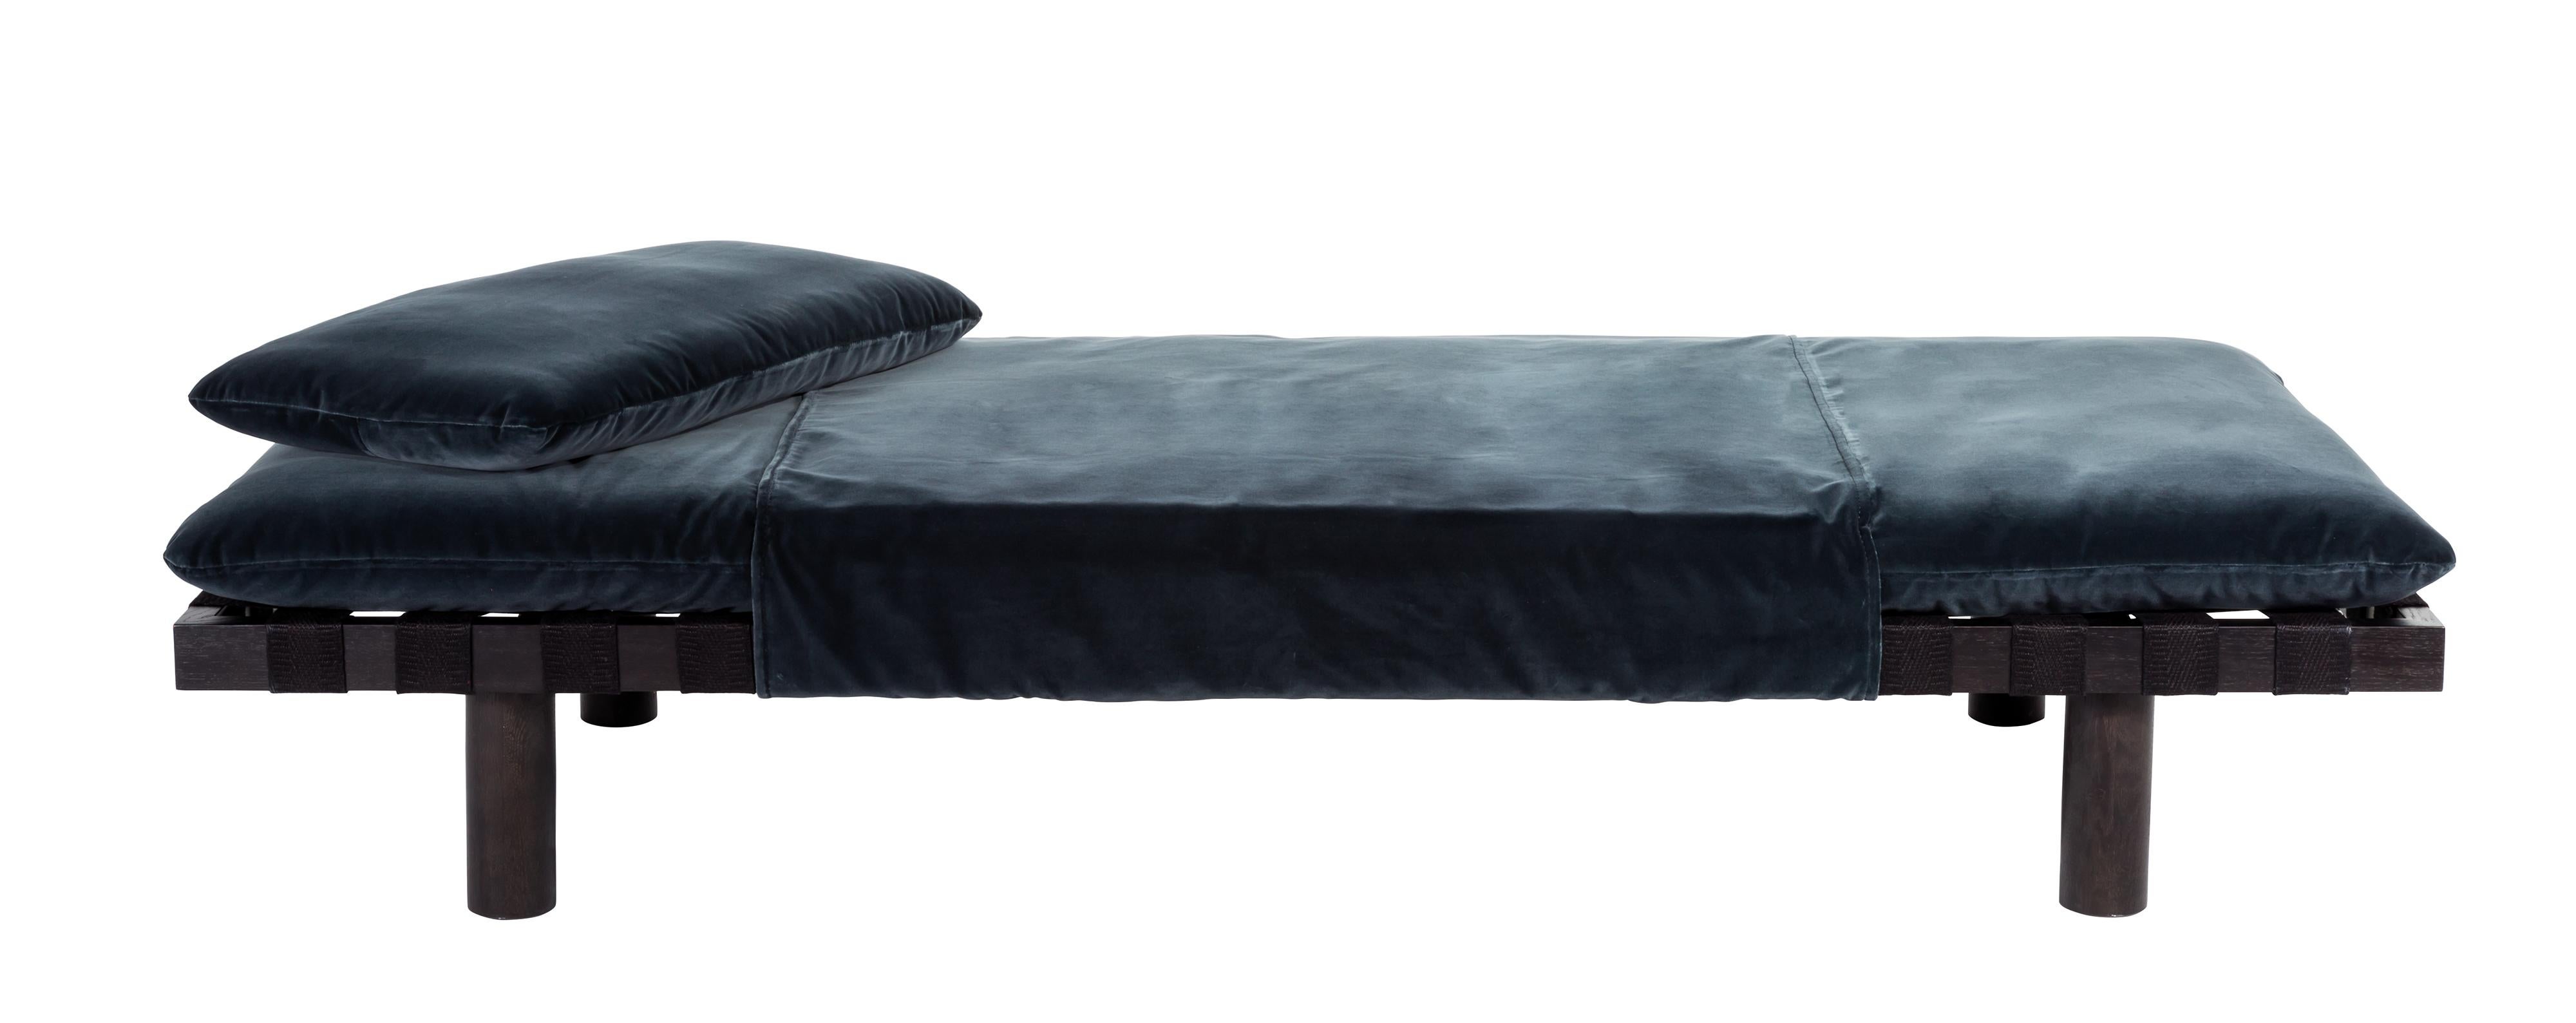 Pallet dark grey velvet black daybed by Pulpo
Dimensions: D200 x W80 x H29 cm.
Materials: Fabric/leather, foam and wood.

Also available in different colours and finishes. 

Thinking about the first significant furniture for pulpo with the